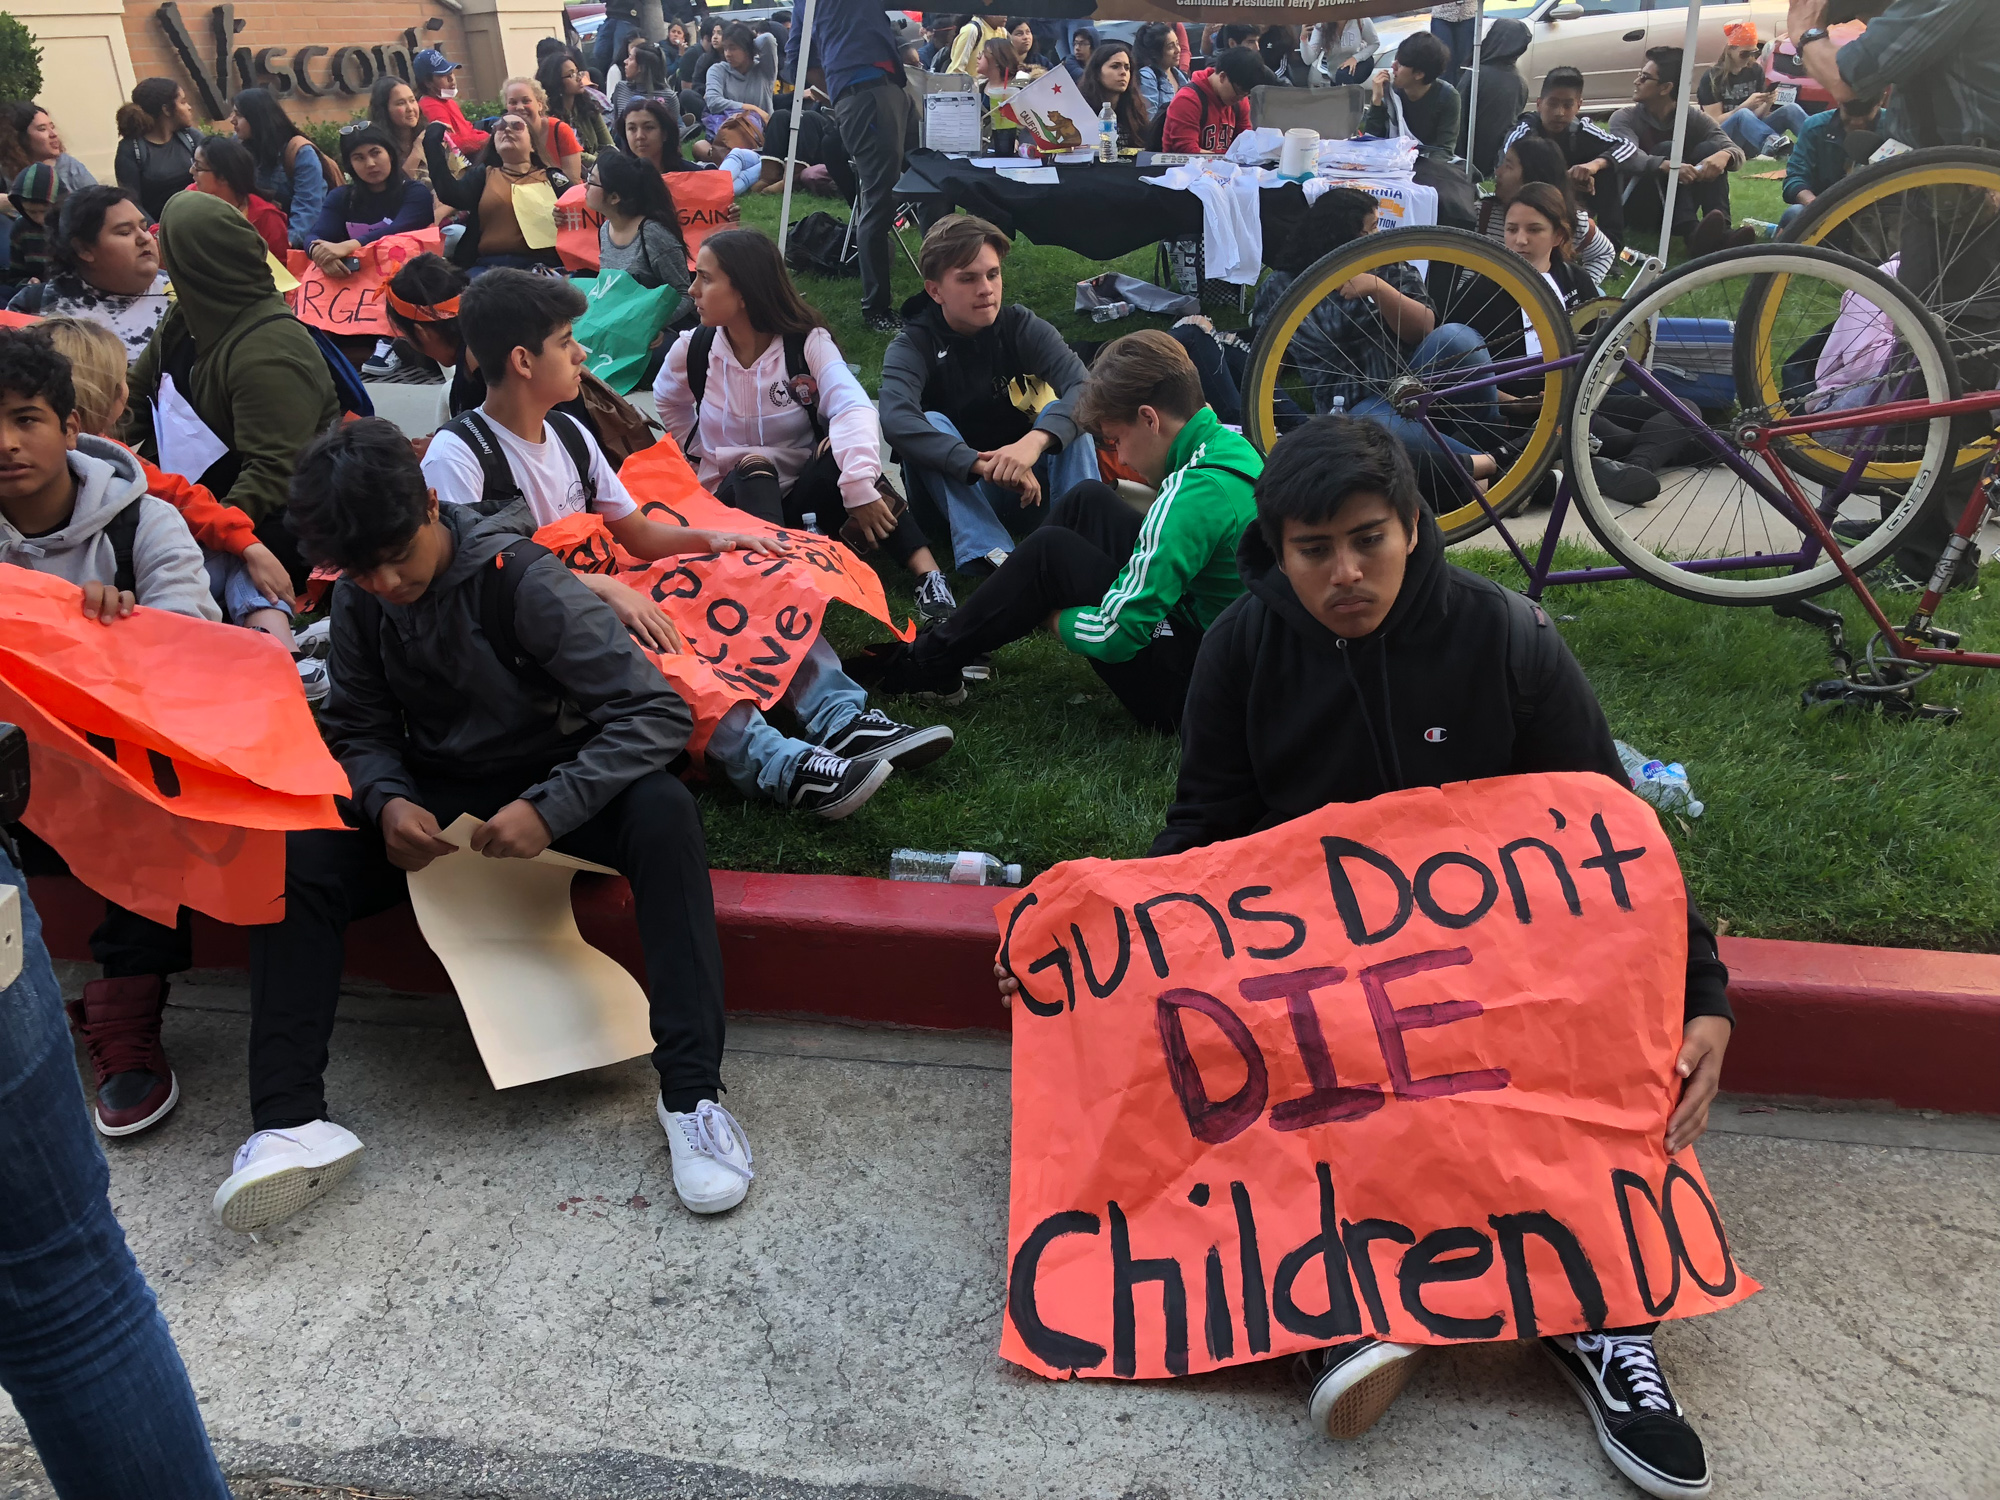  Javier Villega Angel Linda Marquez, freshman at Linda Marquez high school, sits on the curb surrounded by his fellow students while folding a sign that reads, ‘Guns Don’t DIE Children Do’ in front of the Los Angeles Unified School District headquart